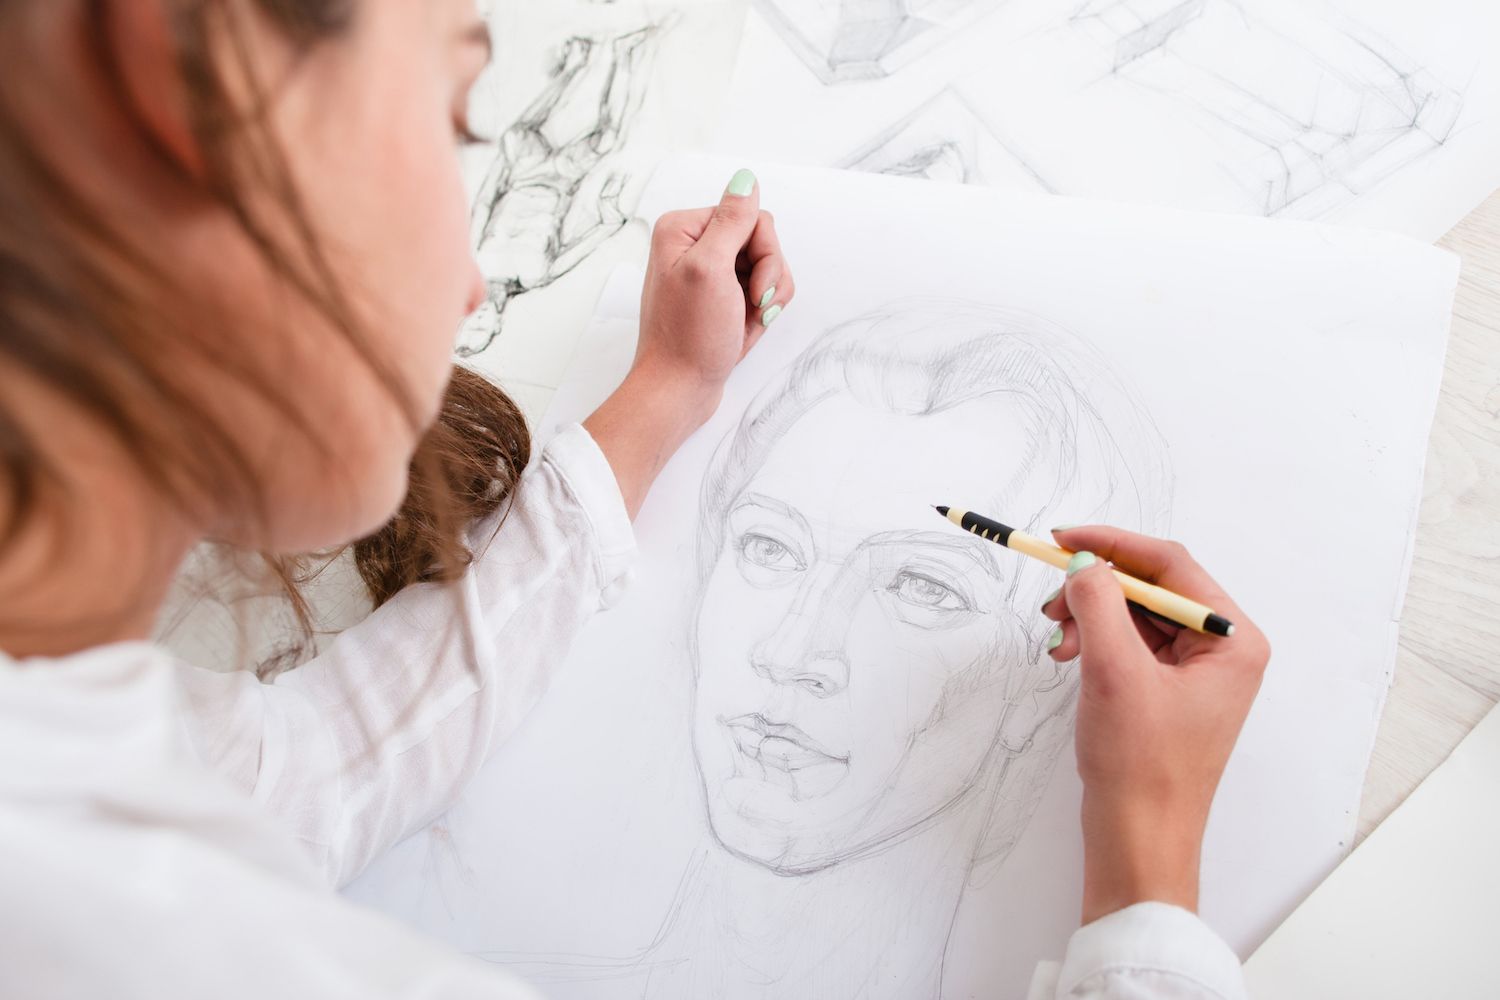 Artists: Learn 10 New Drawing Habits, Fresh Perspectives And Goals